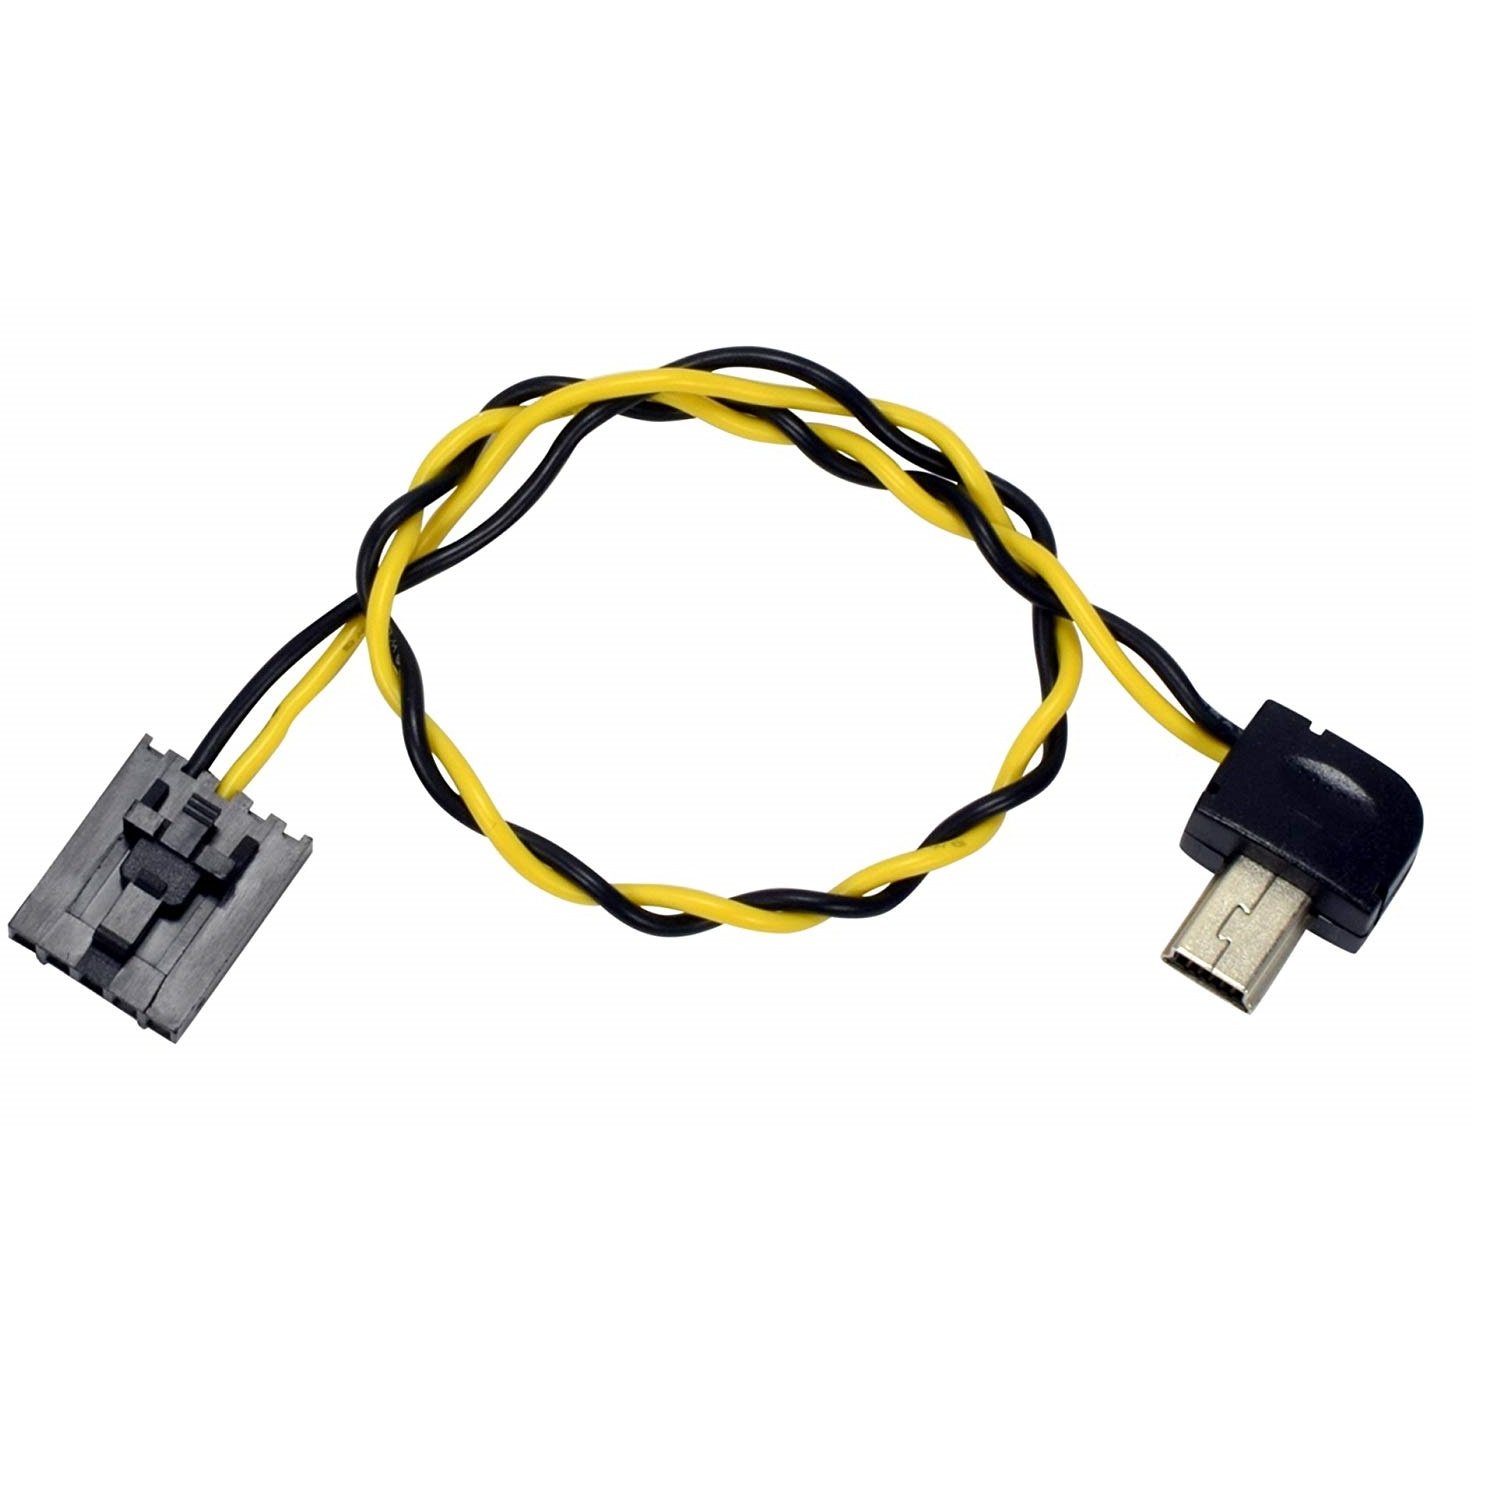 grad Ligegyldighed Parcel Mini USB (90° Connector) to FPV AV Output Cable for GoPro Hero 3 – Robotist